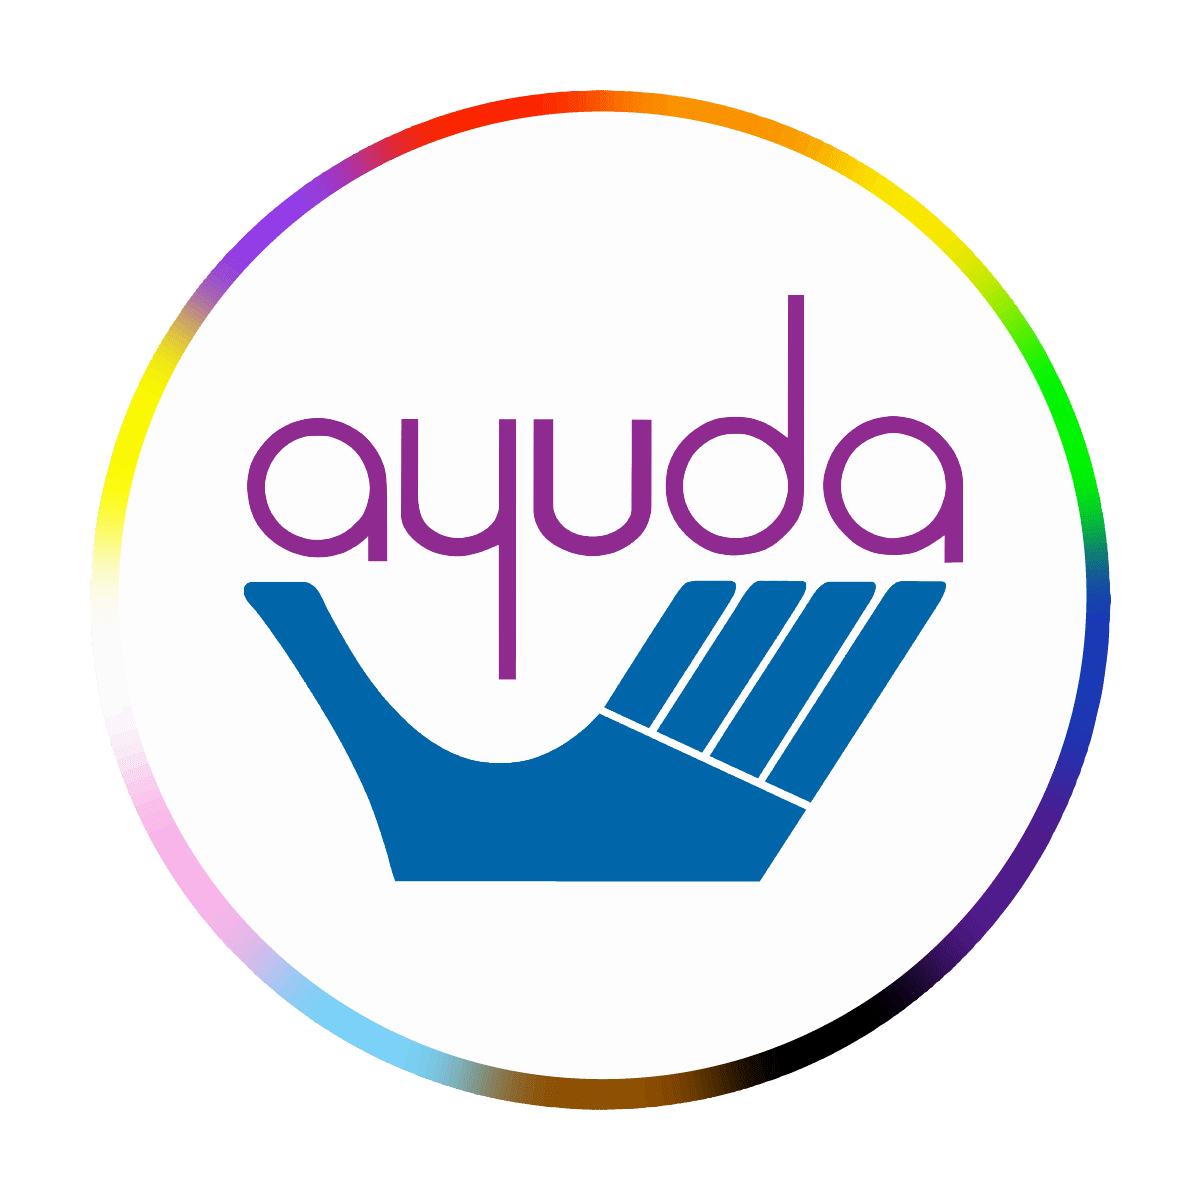 Ayuda Pride logo includes colors from the Pride Flag, transgender flag, and intersex flag.